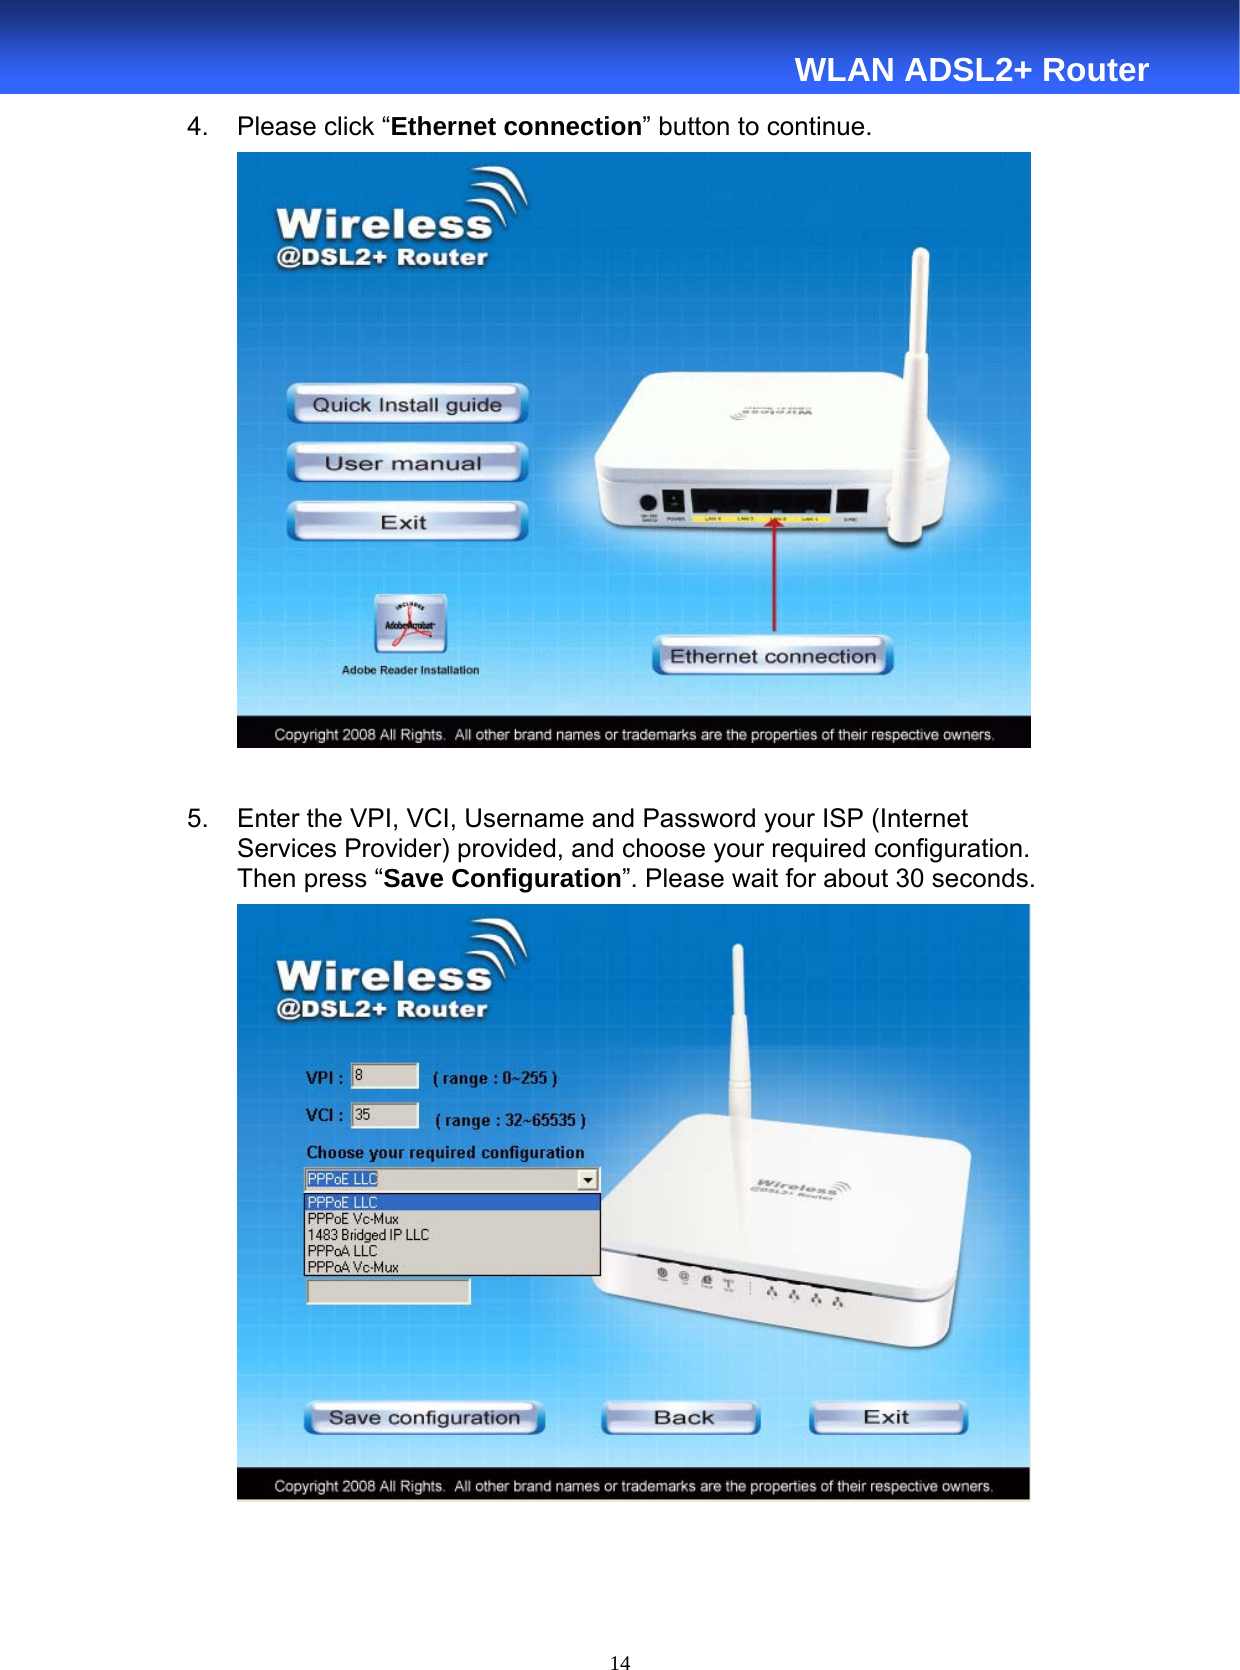  14  WLAN ADSL2+ Router 4.  Please click “Ethernet connection” button to continue.   5.  Enter the VPI, VCI, Username and Password your ISP (Internet Services Provider) provided, and choose your required configuration. Then press “Save Configuration”. Please wait for about 30 seconds.    